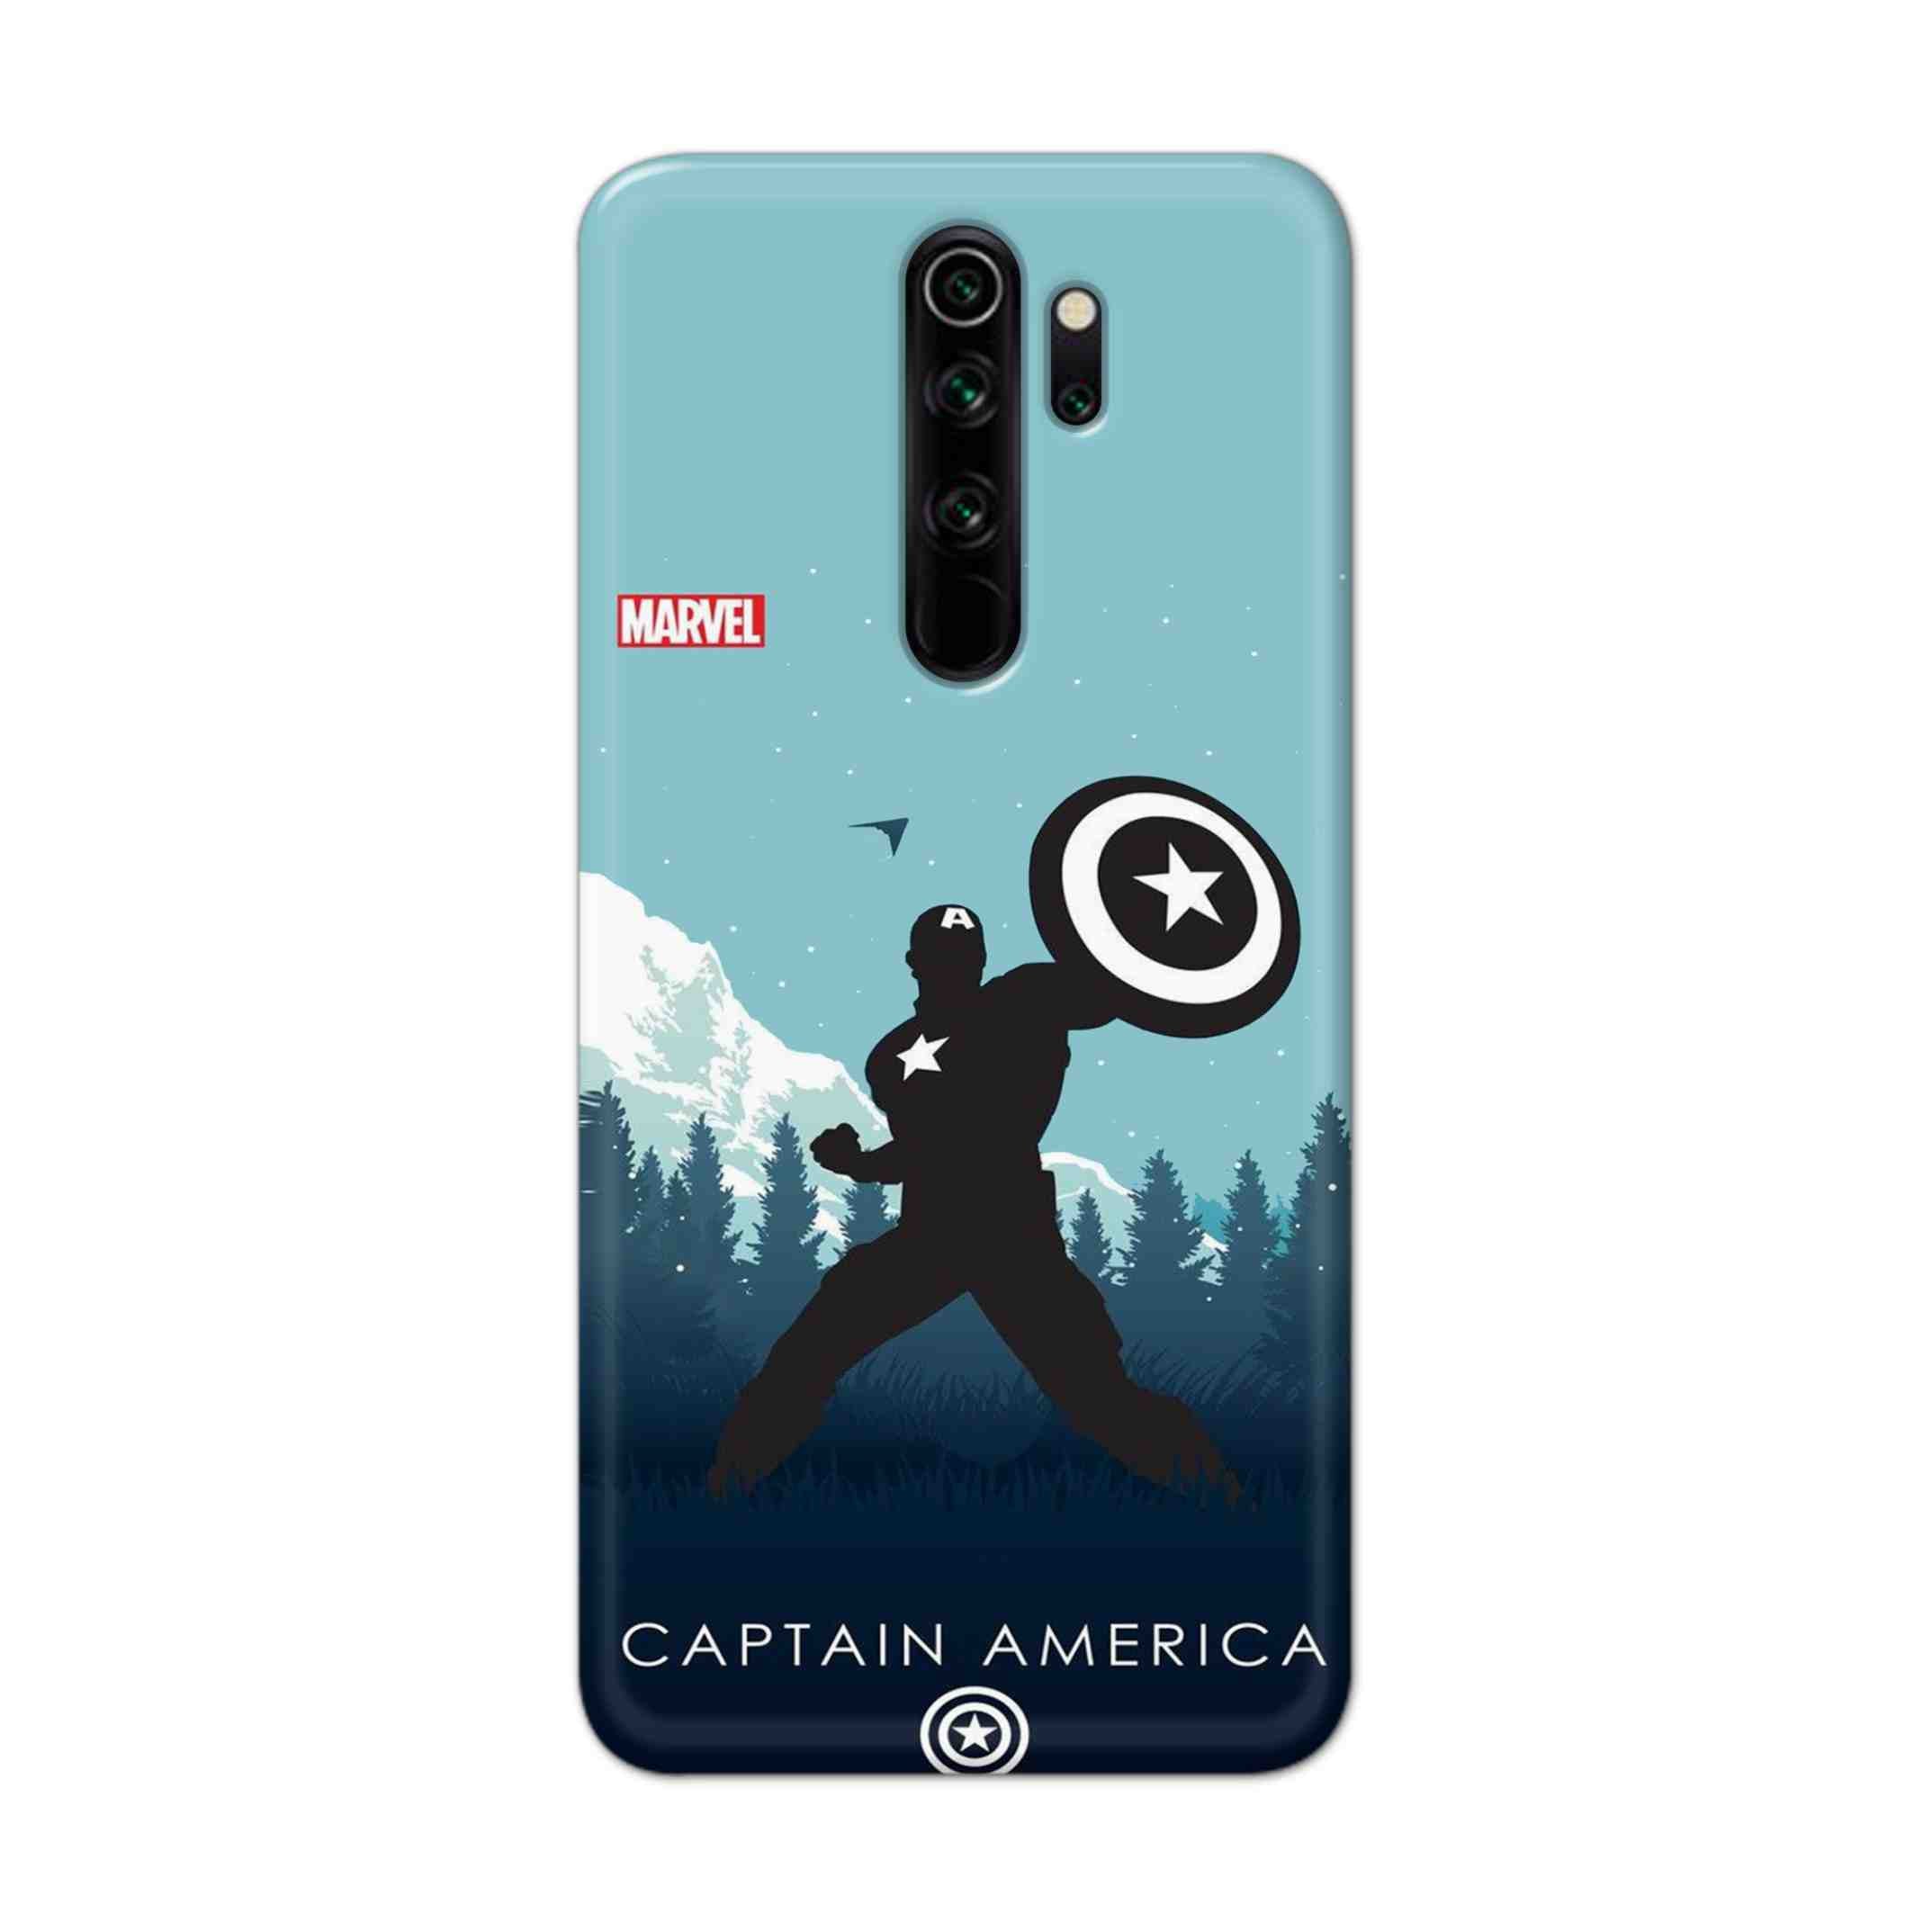 Buy Captain America Hard Back Mobile Phone Case Cover For Xiaomi Redmi Note 8 Pro Online